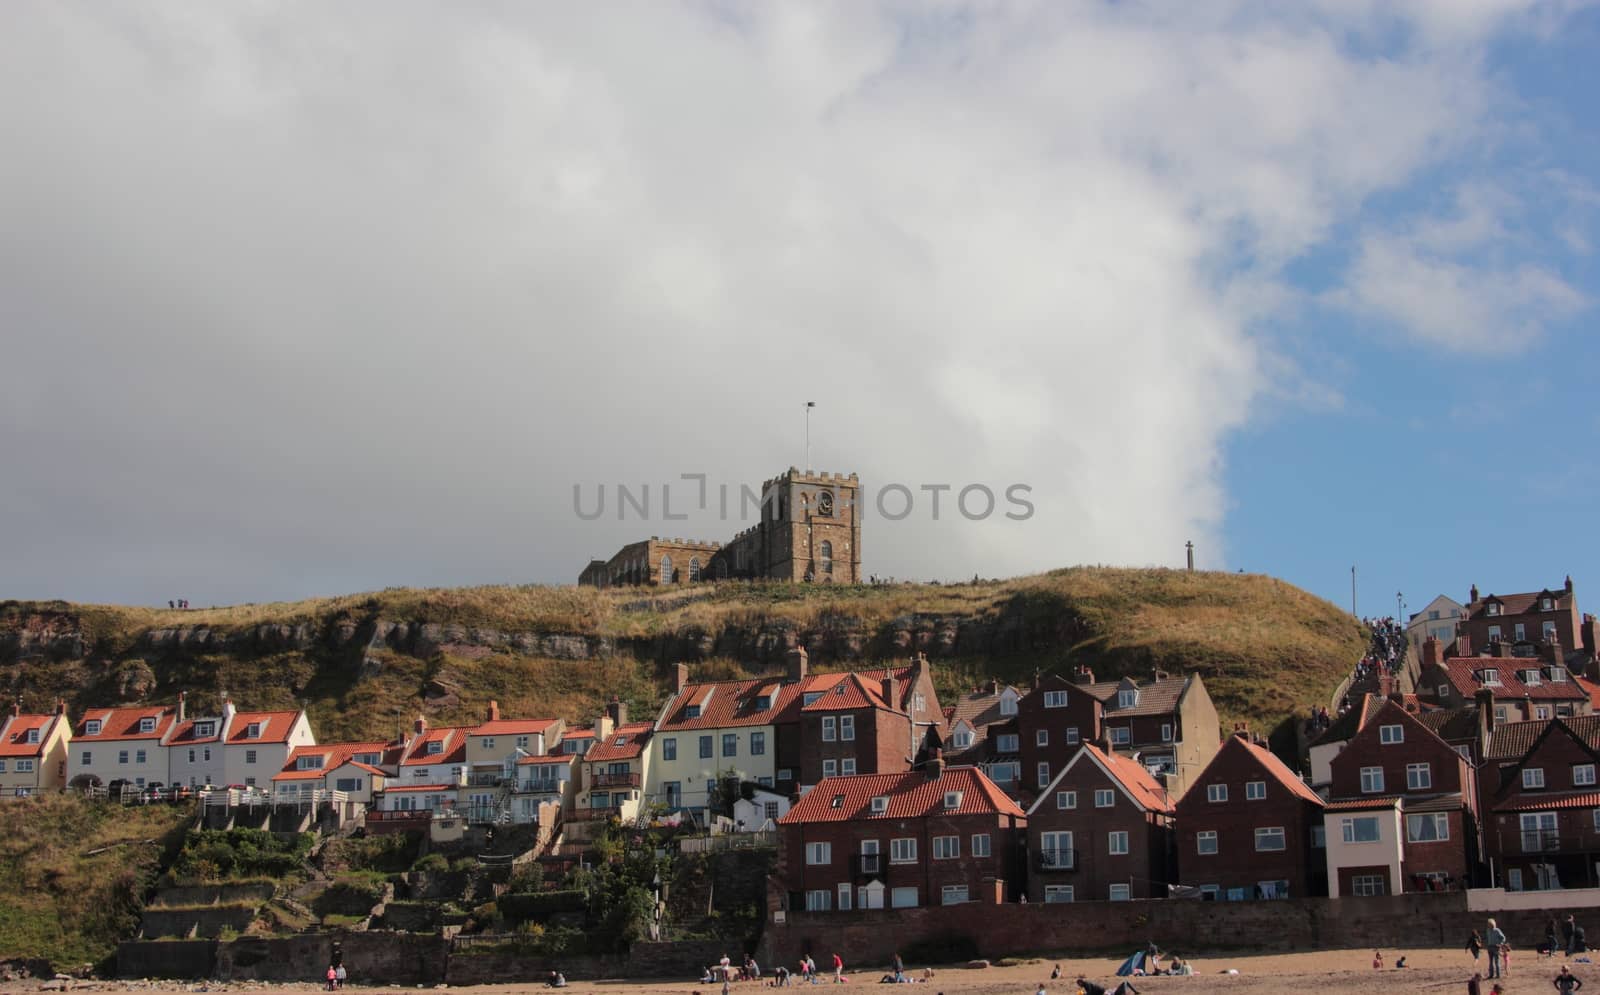 St Mary's Church Whitby Yorkshire England by mitzy